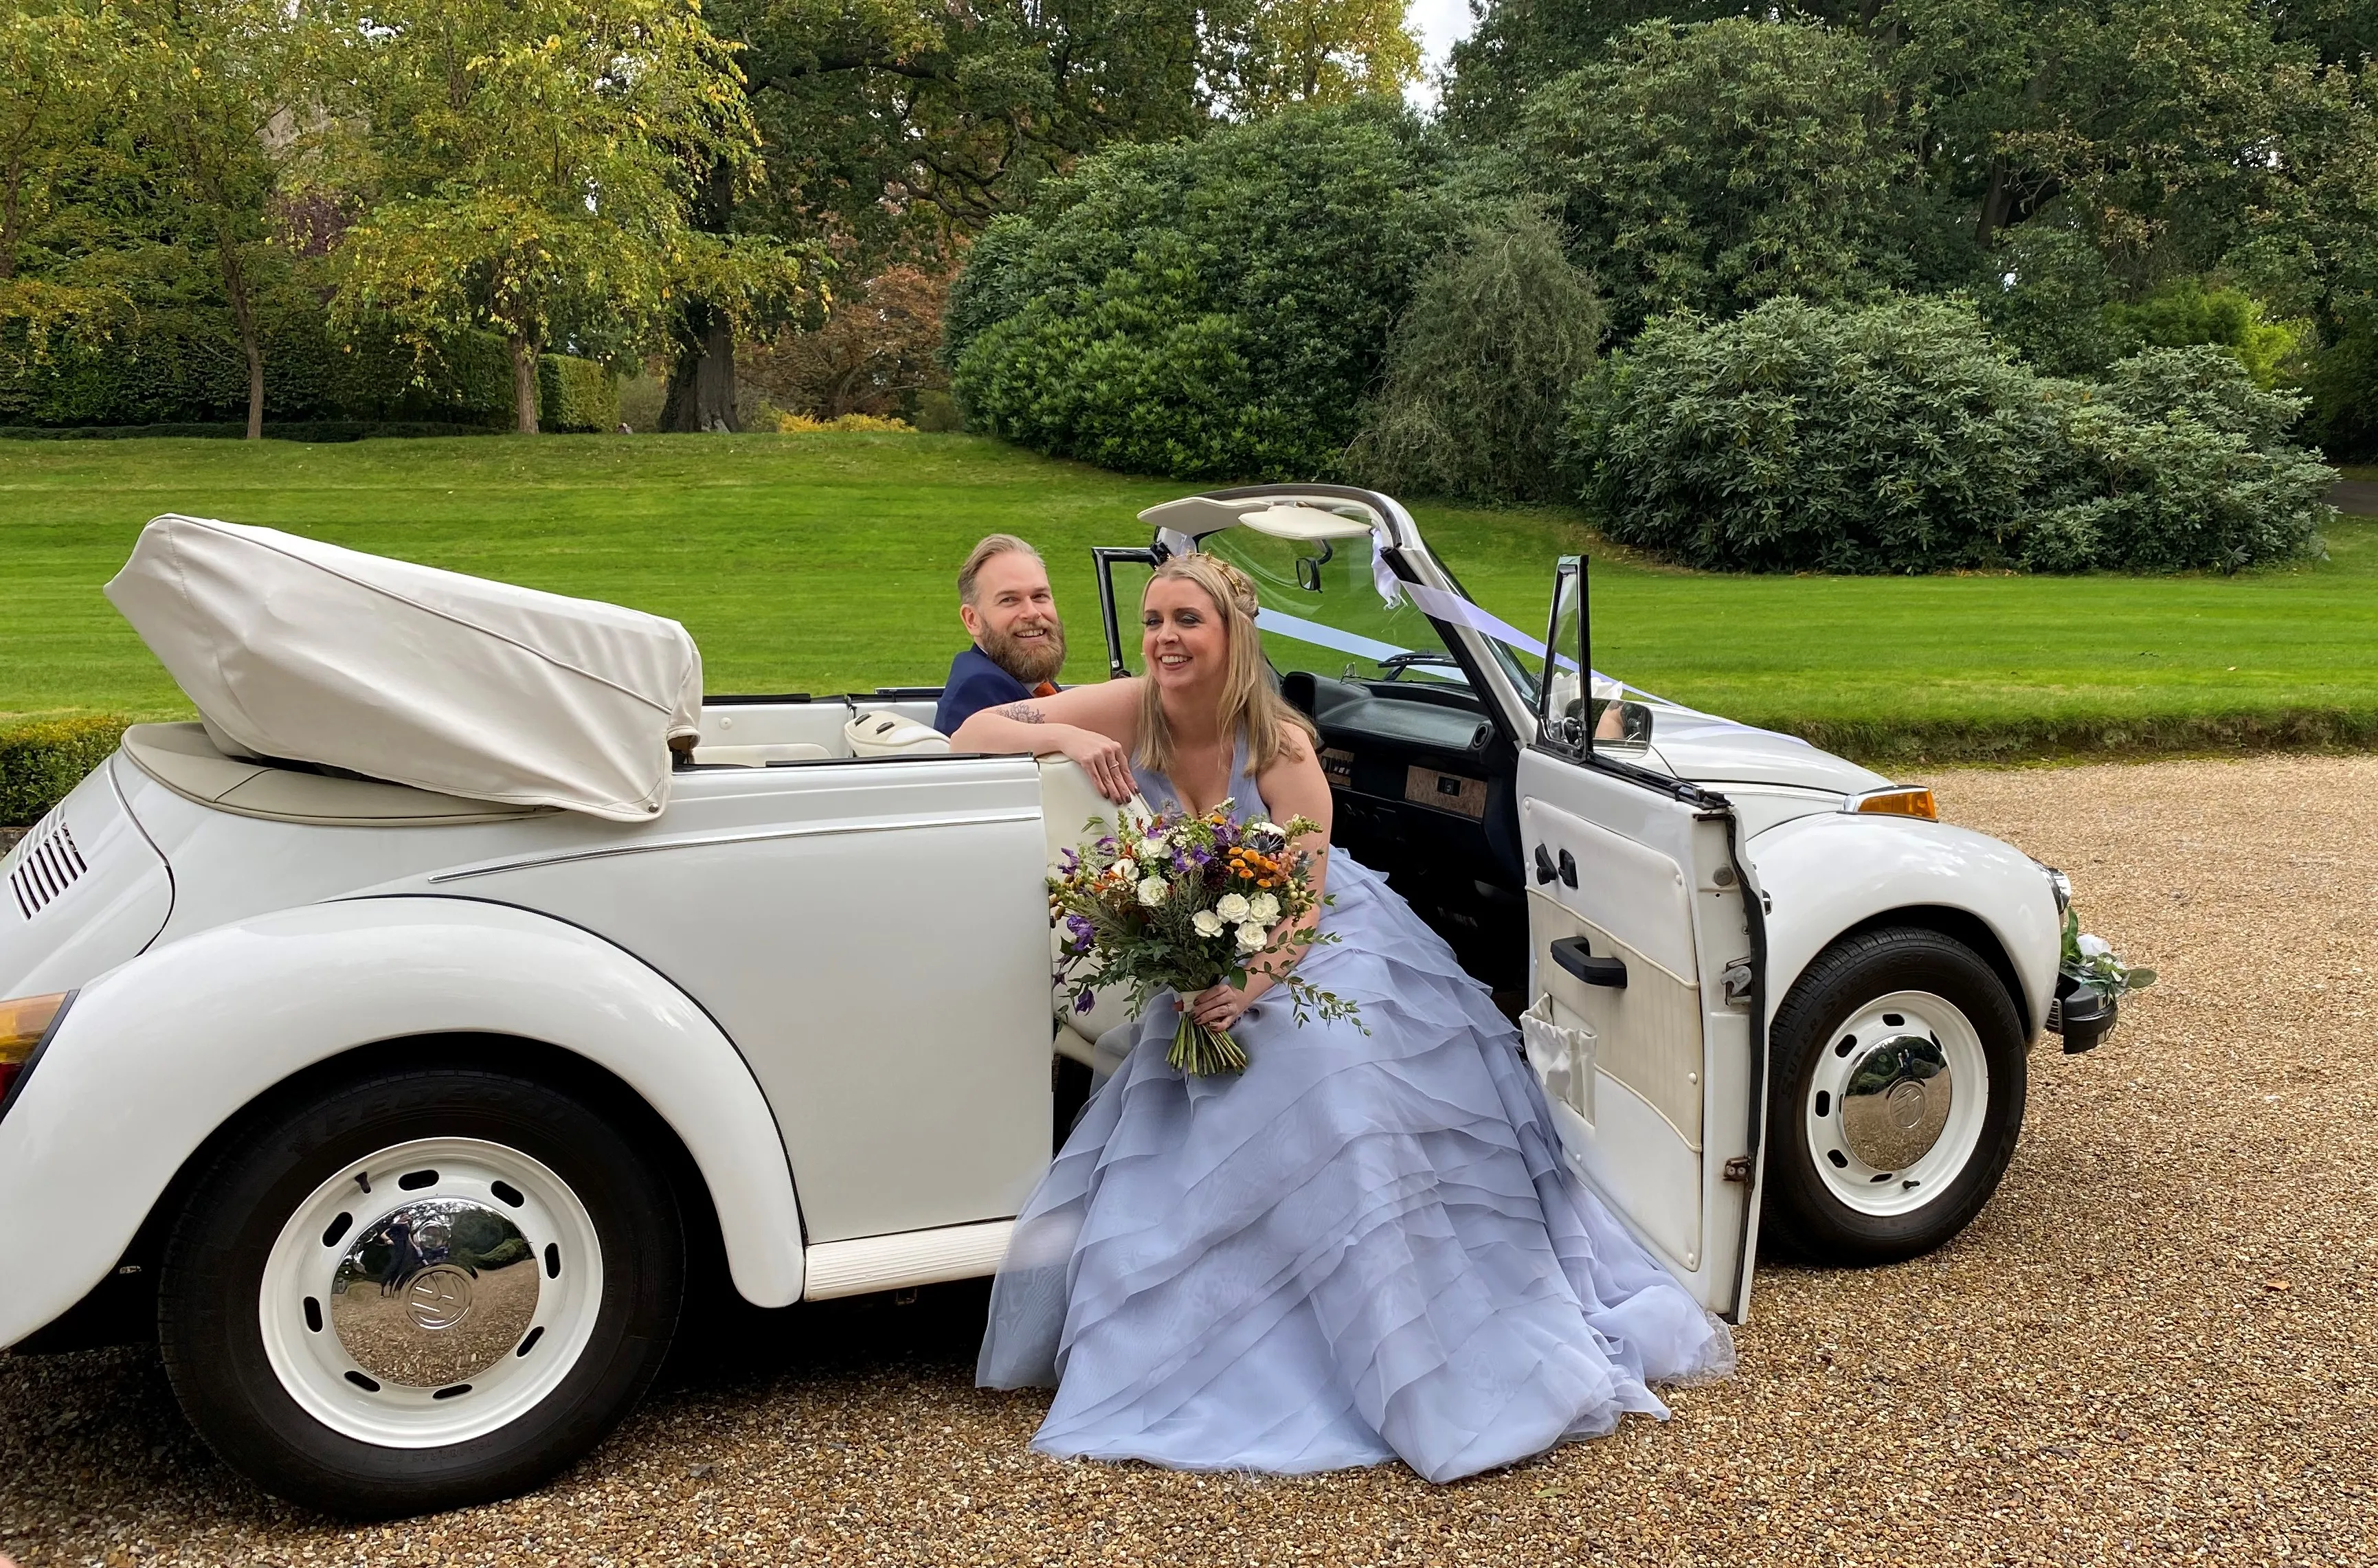 Ivory Classic Beetle Convertible with roof down with bride and groom inside the vehicle.